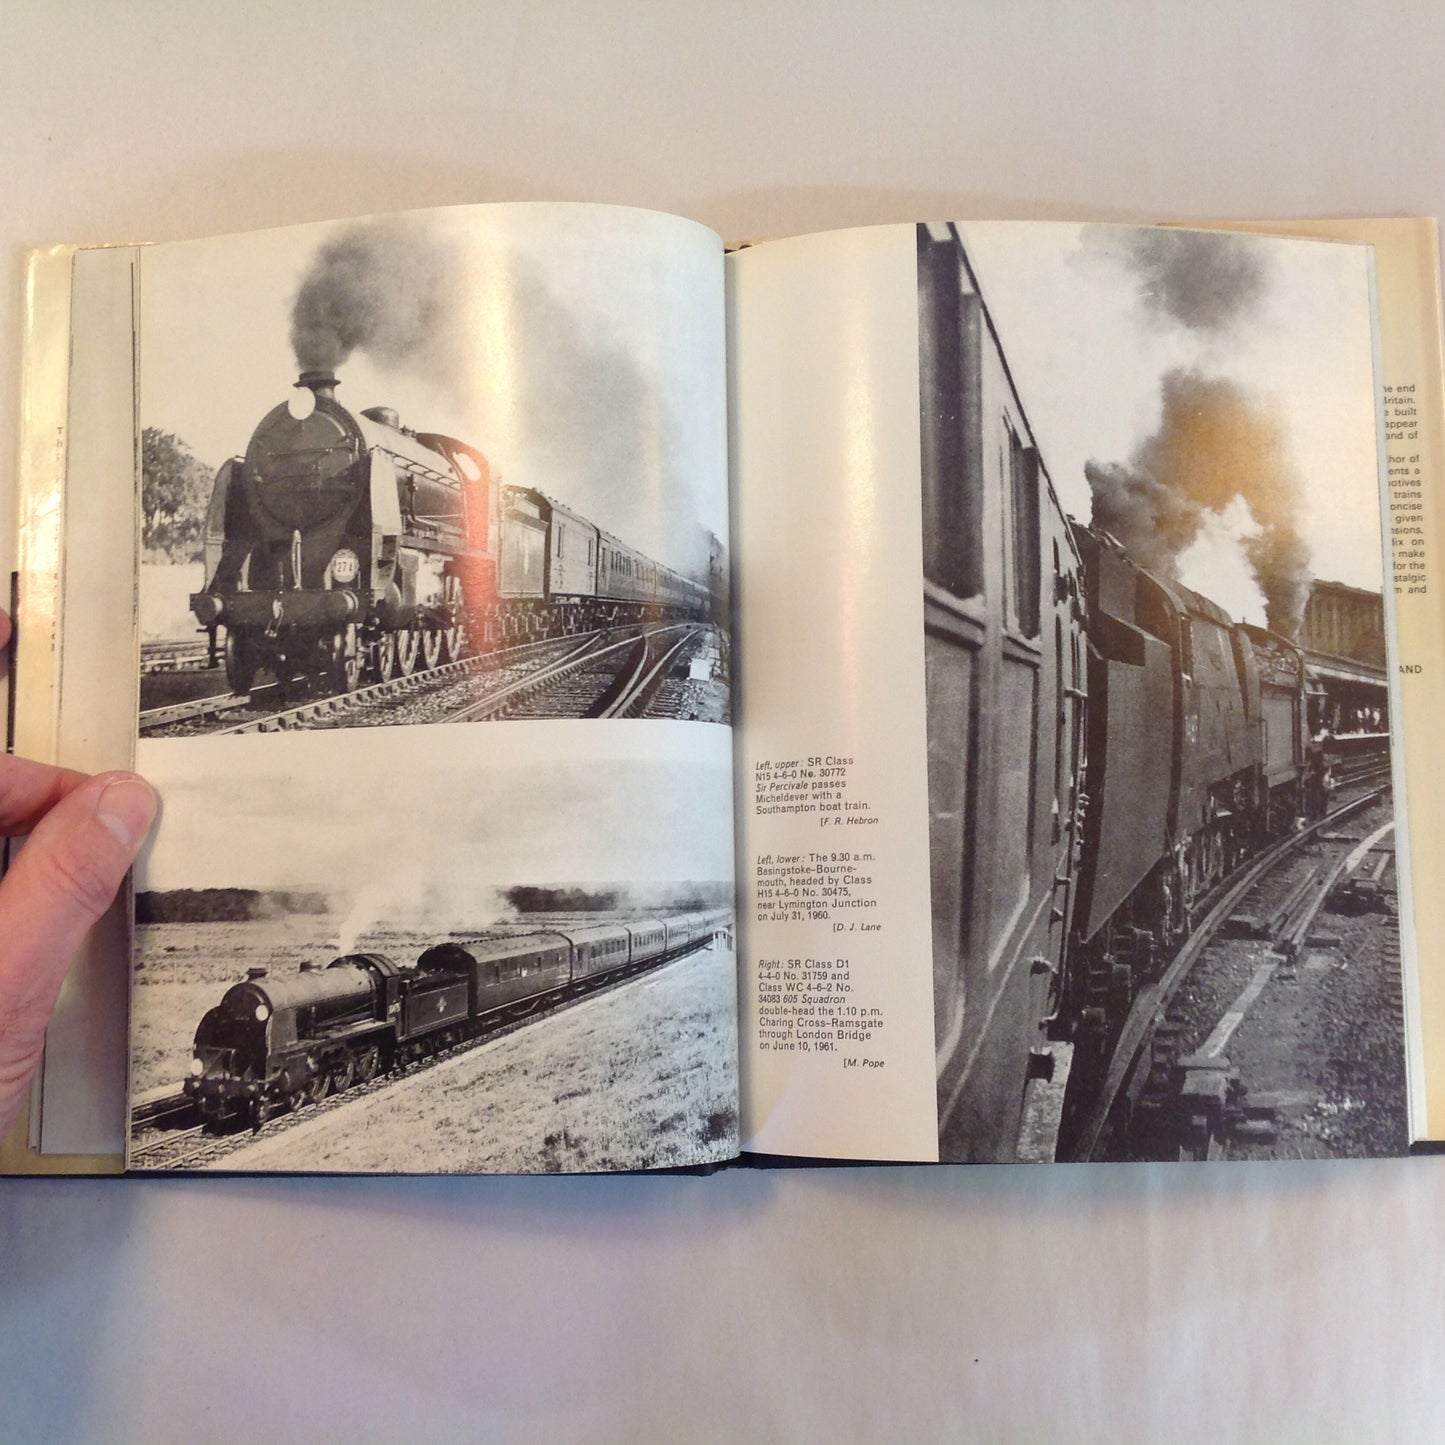 Vintage 1976 Pictorial Hardcover The Last Years of British Steam Ian Allan